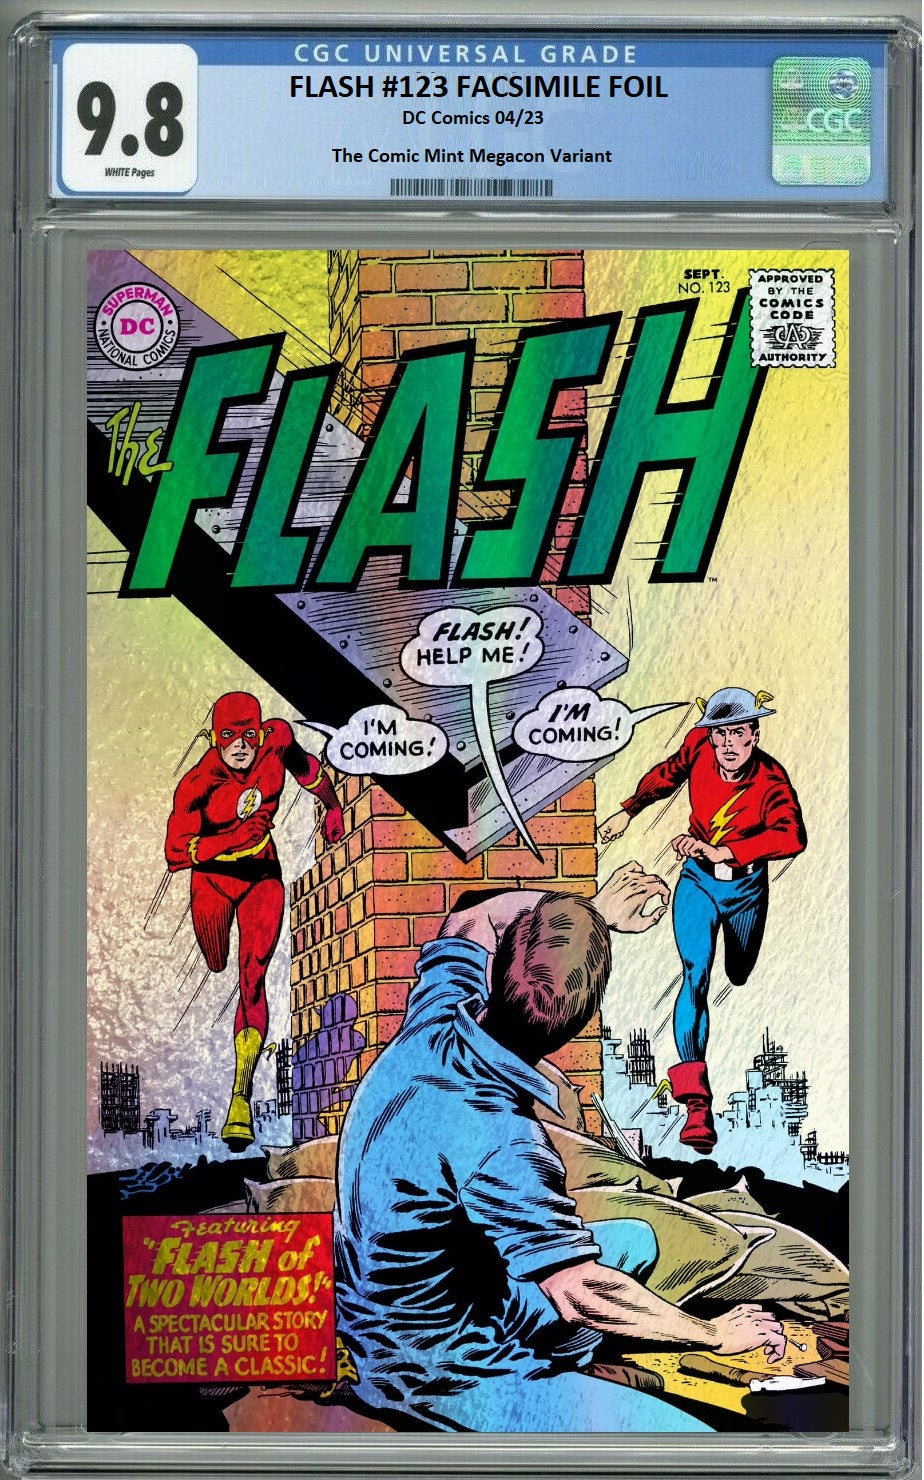 FLASH #123 MEGACON FOIL VARIANT LIMITED TO 1000 COPIES CGC 9.8